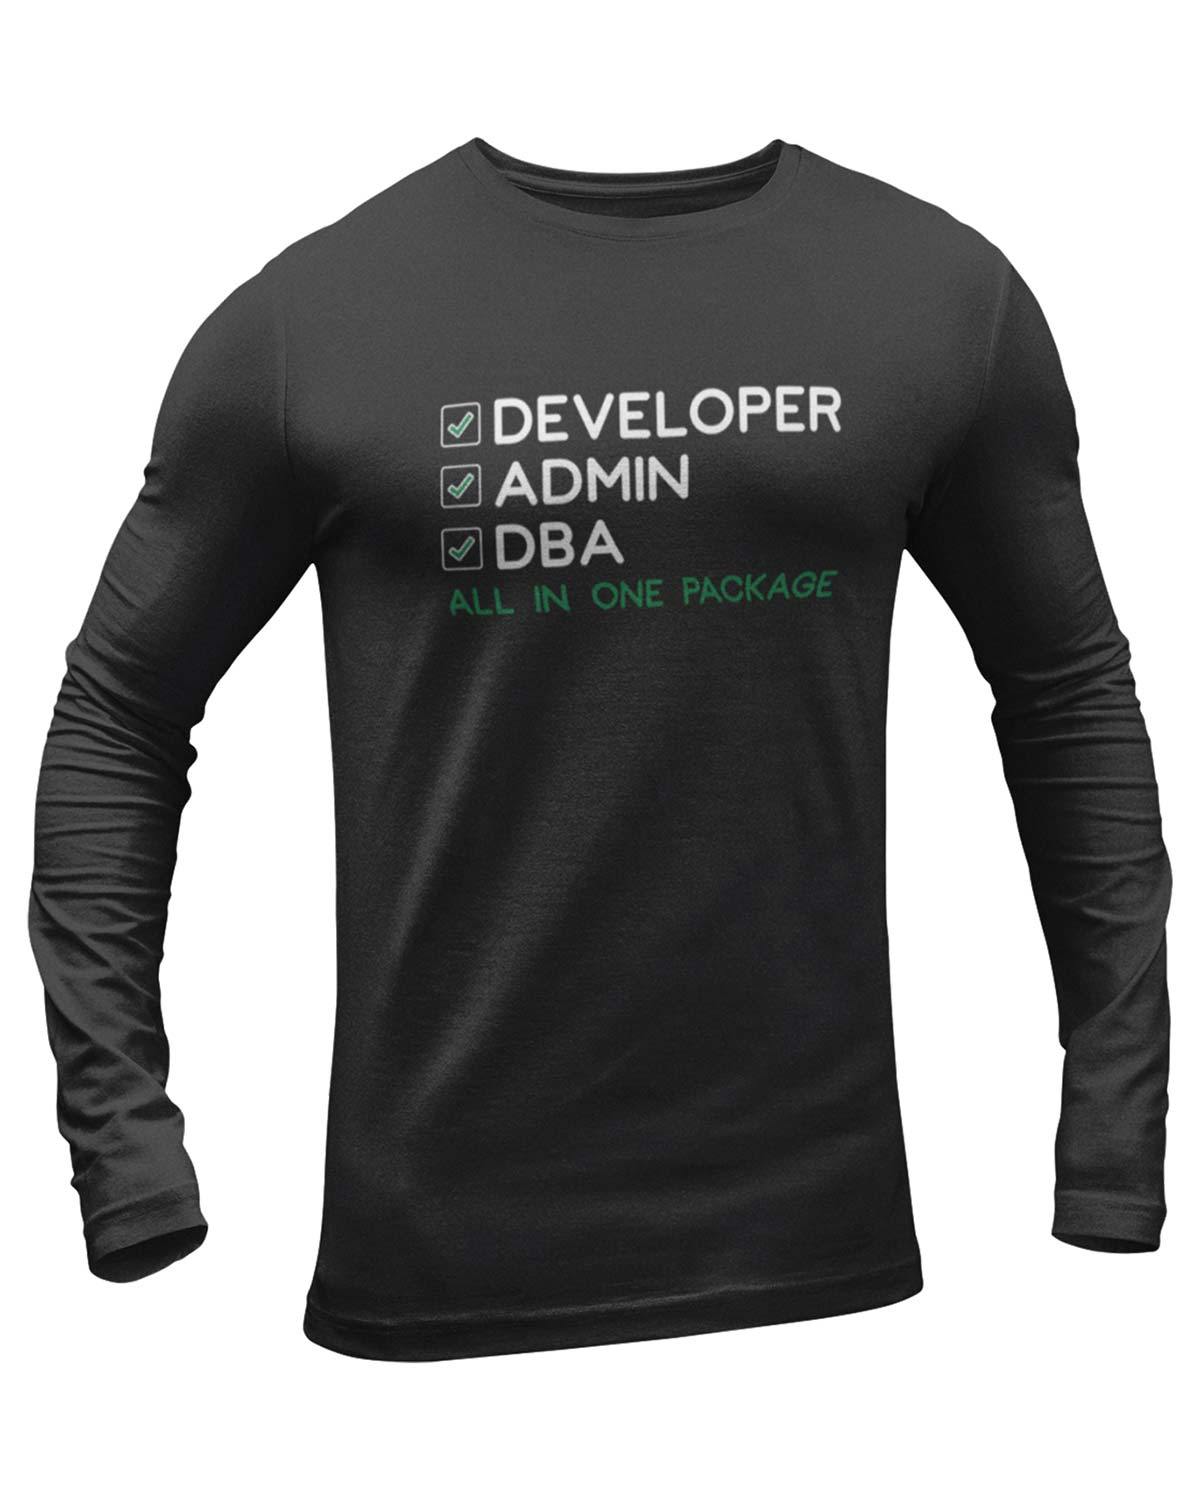 Developer Admin DBA All In One Package T Shirt